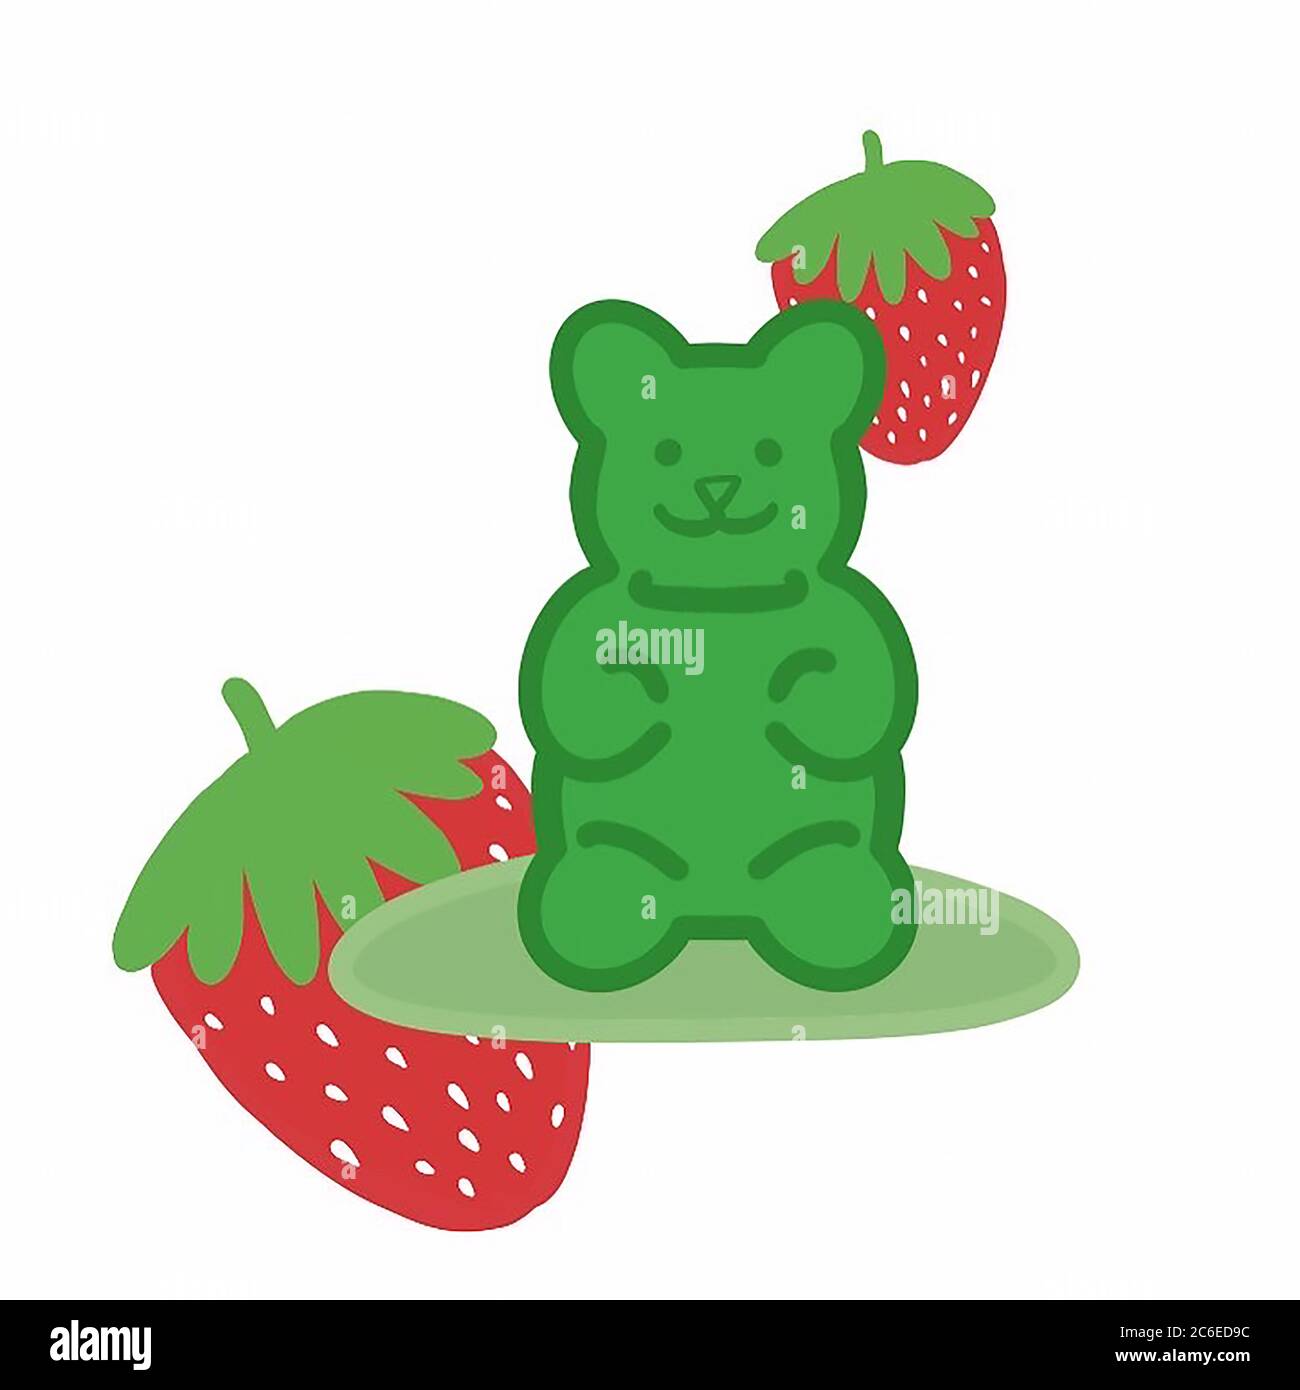 gummy bear cute illustrations with fruits Stock Photo